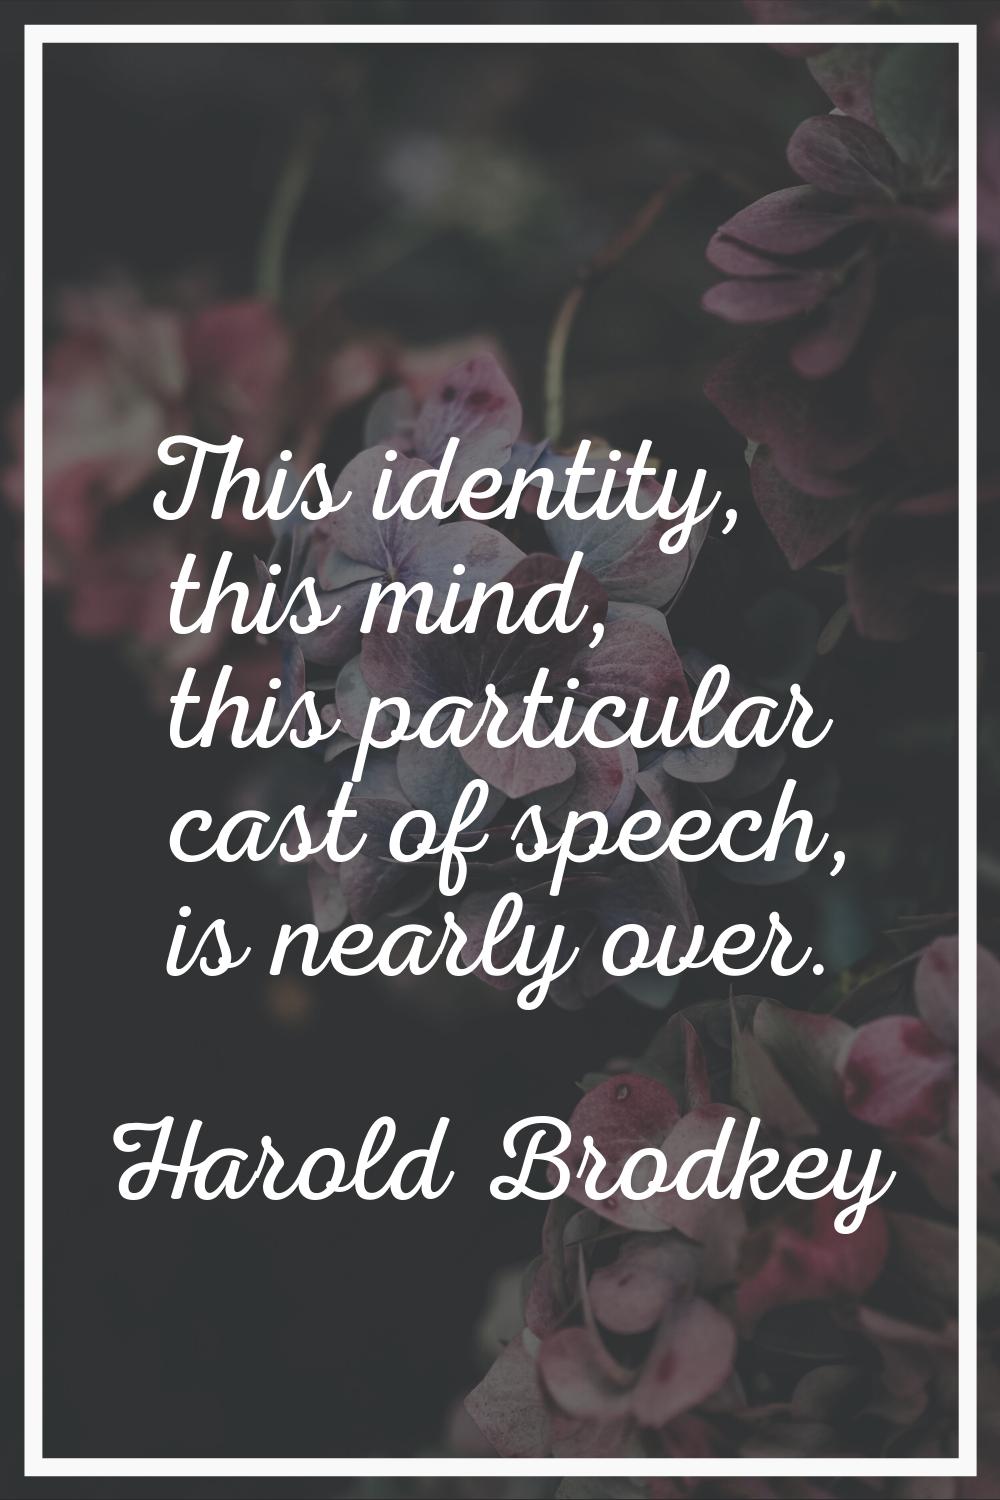 This identity, this mind, this particular cast of speech, is nearly over.